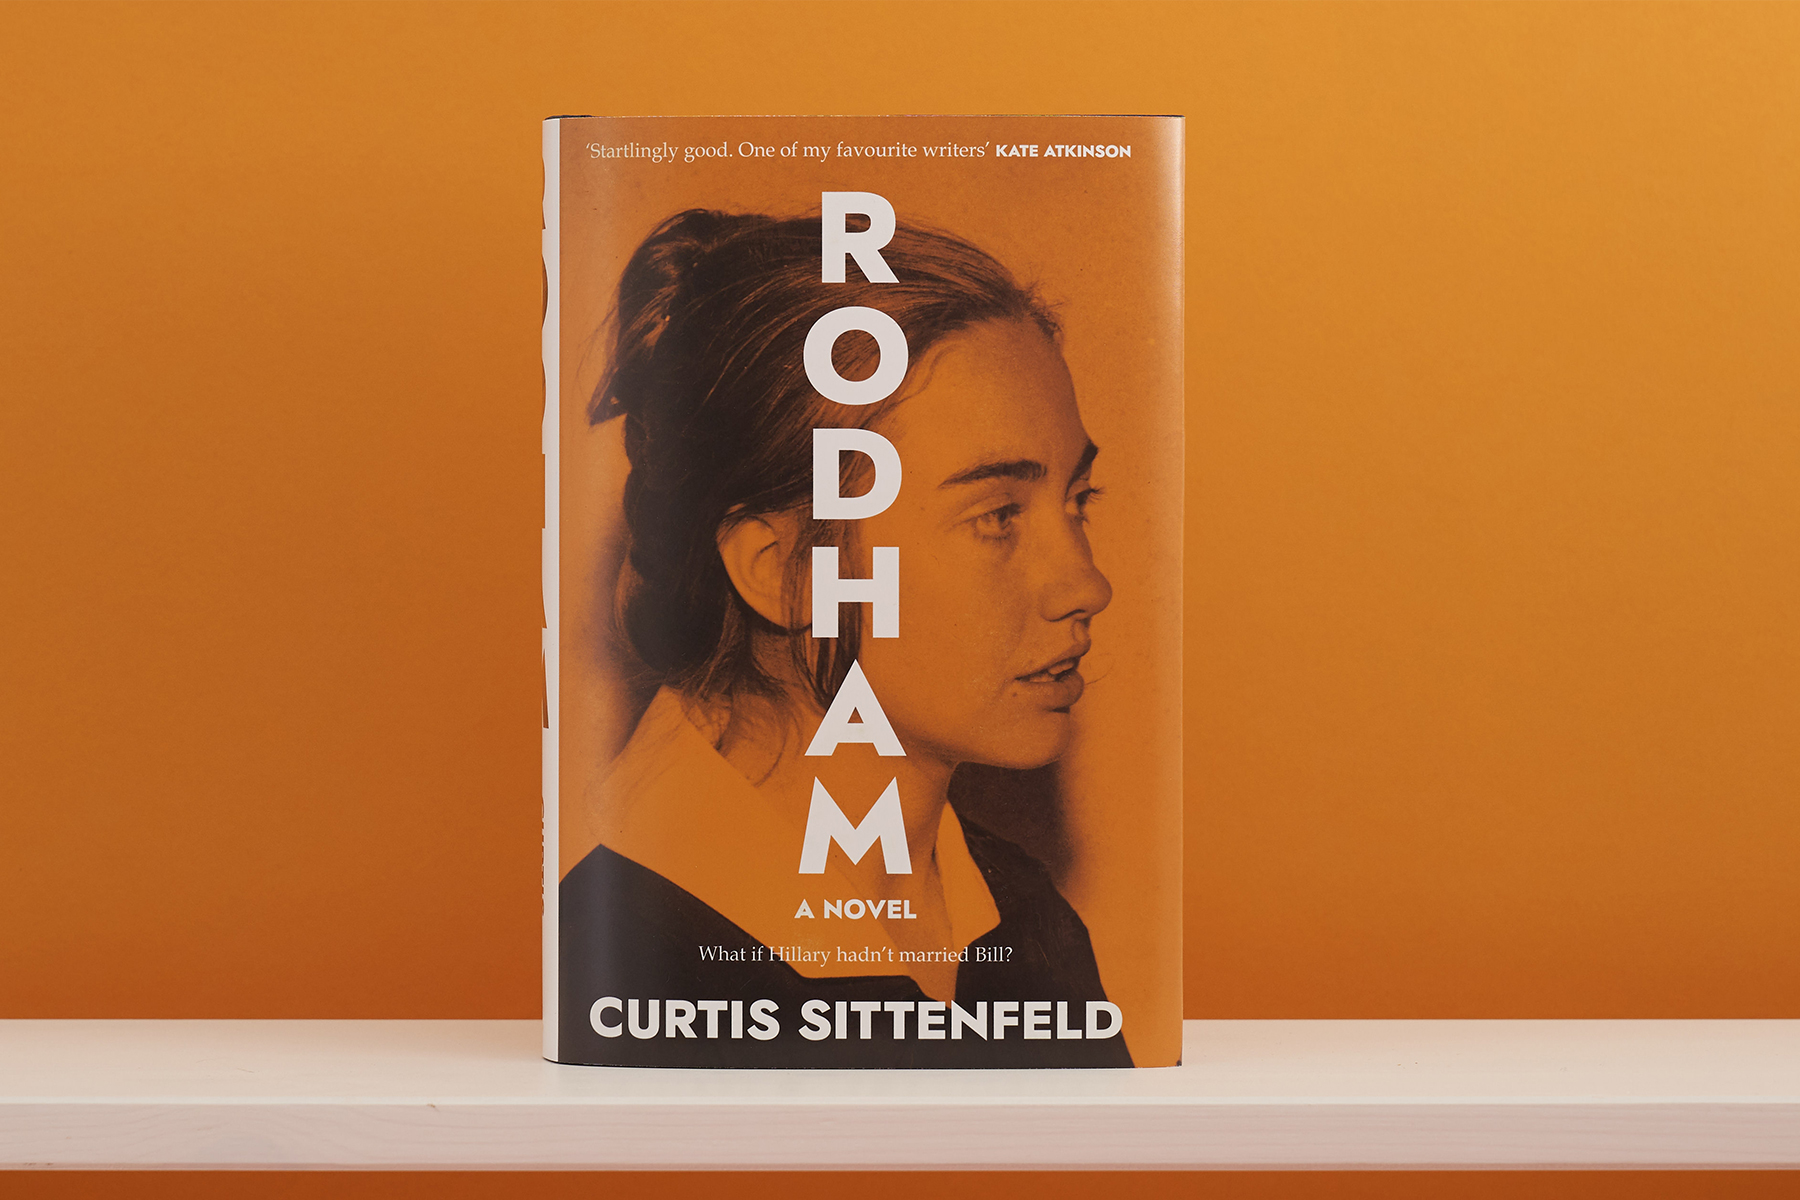 An image of Curtis Sittenfeld's book 'Rodham' on an orange background